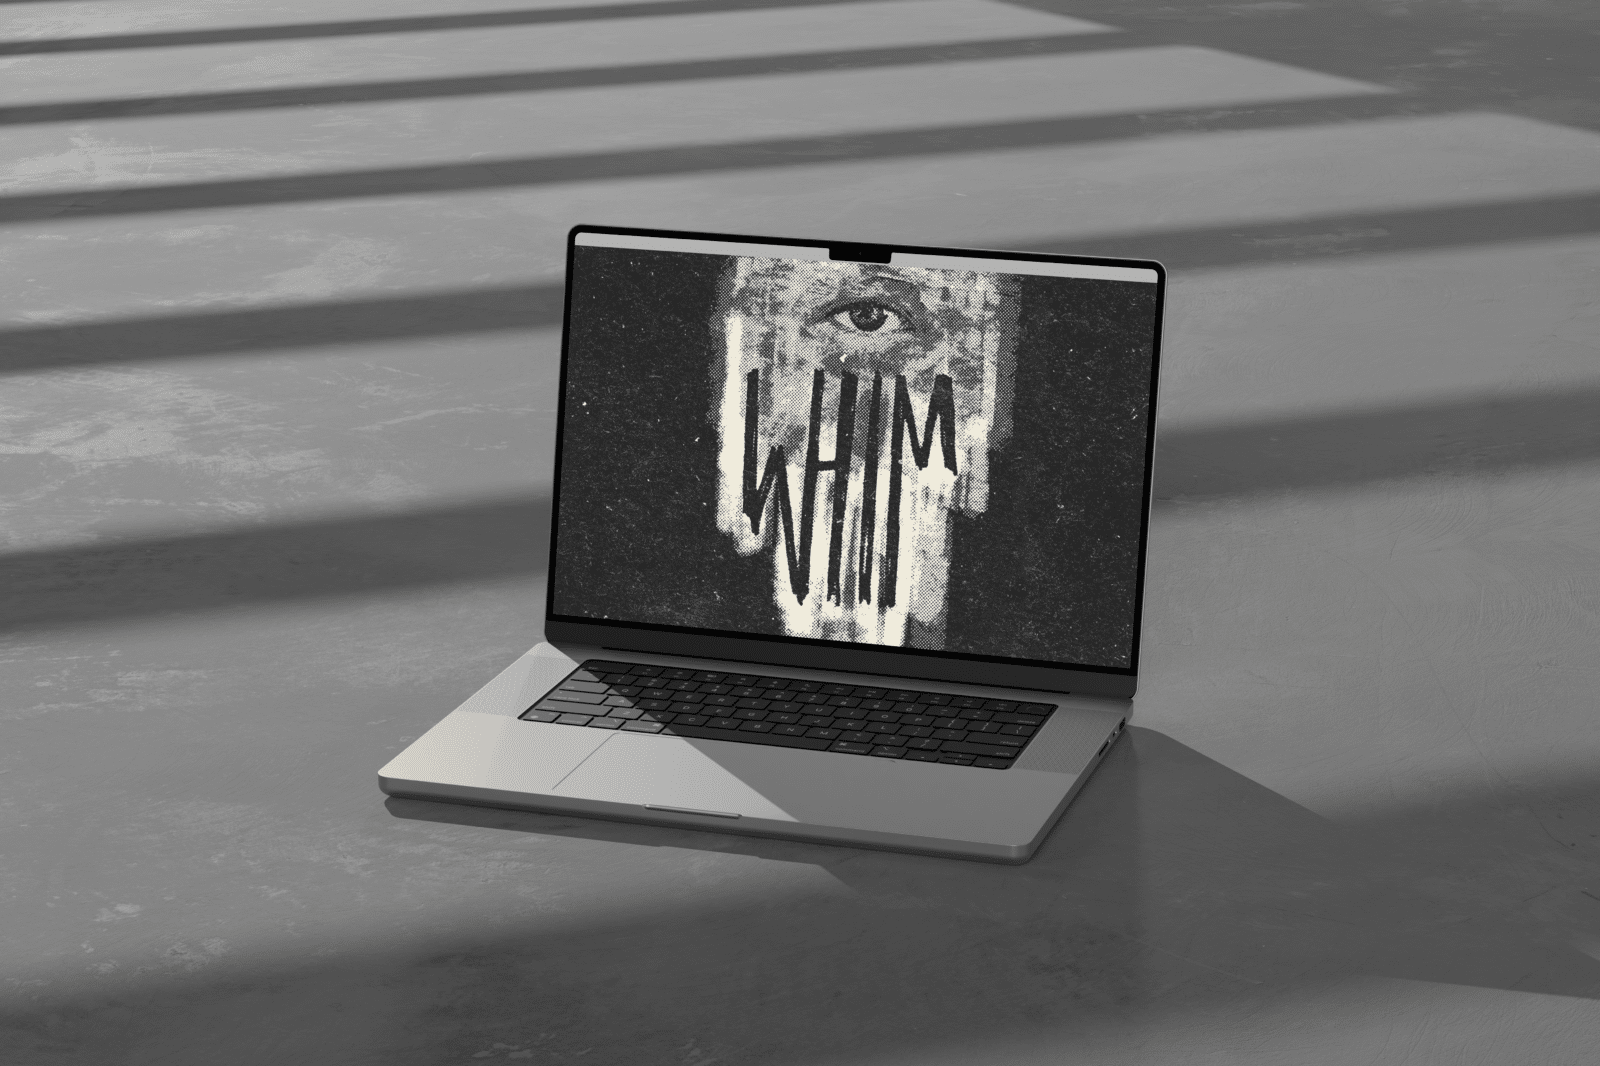 laptop with "whim" logo